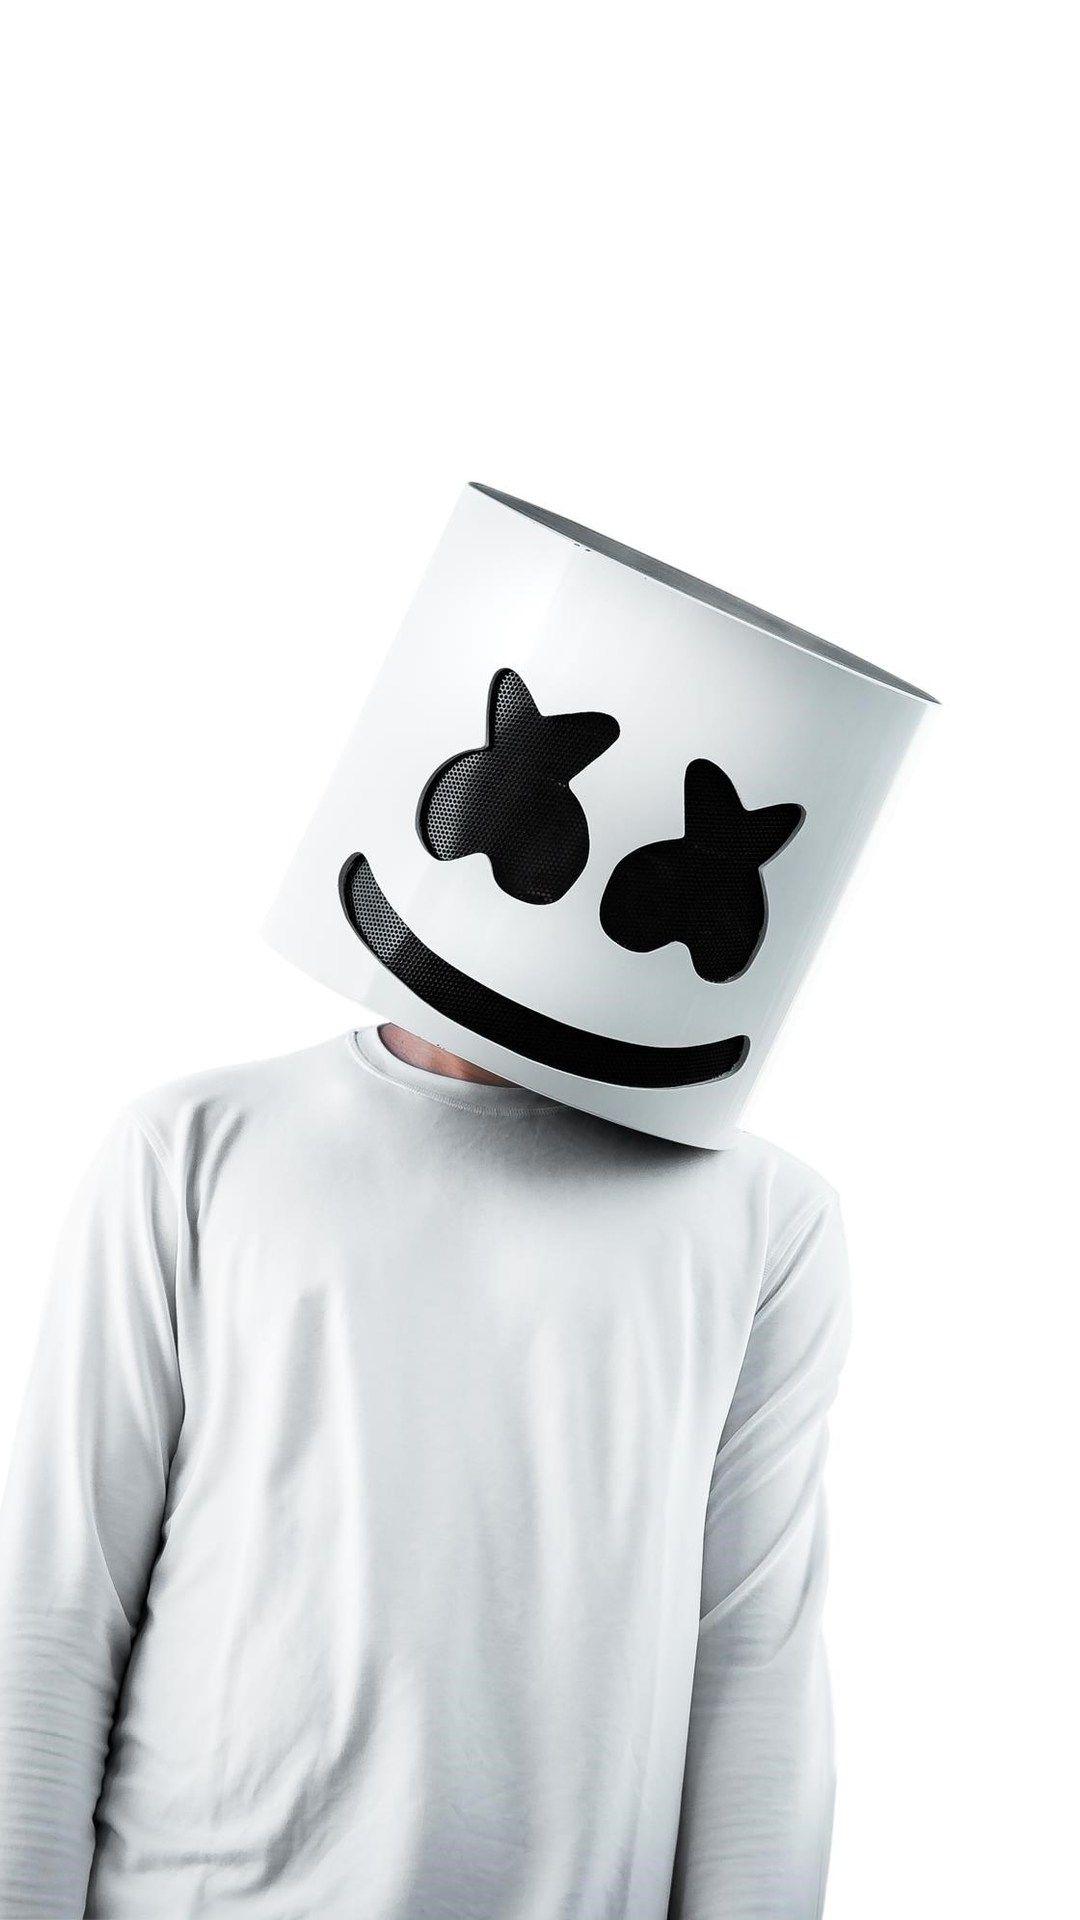 Marshmello htc one wallpaper, free and easy to download